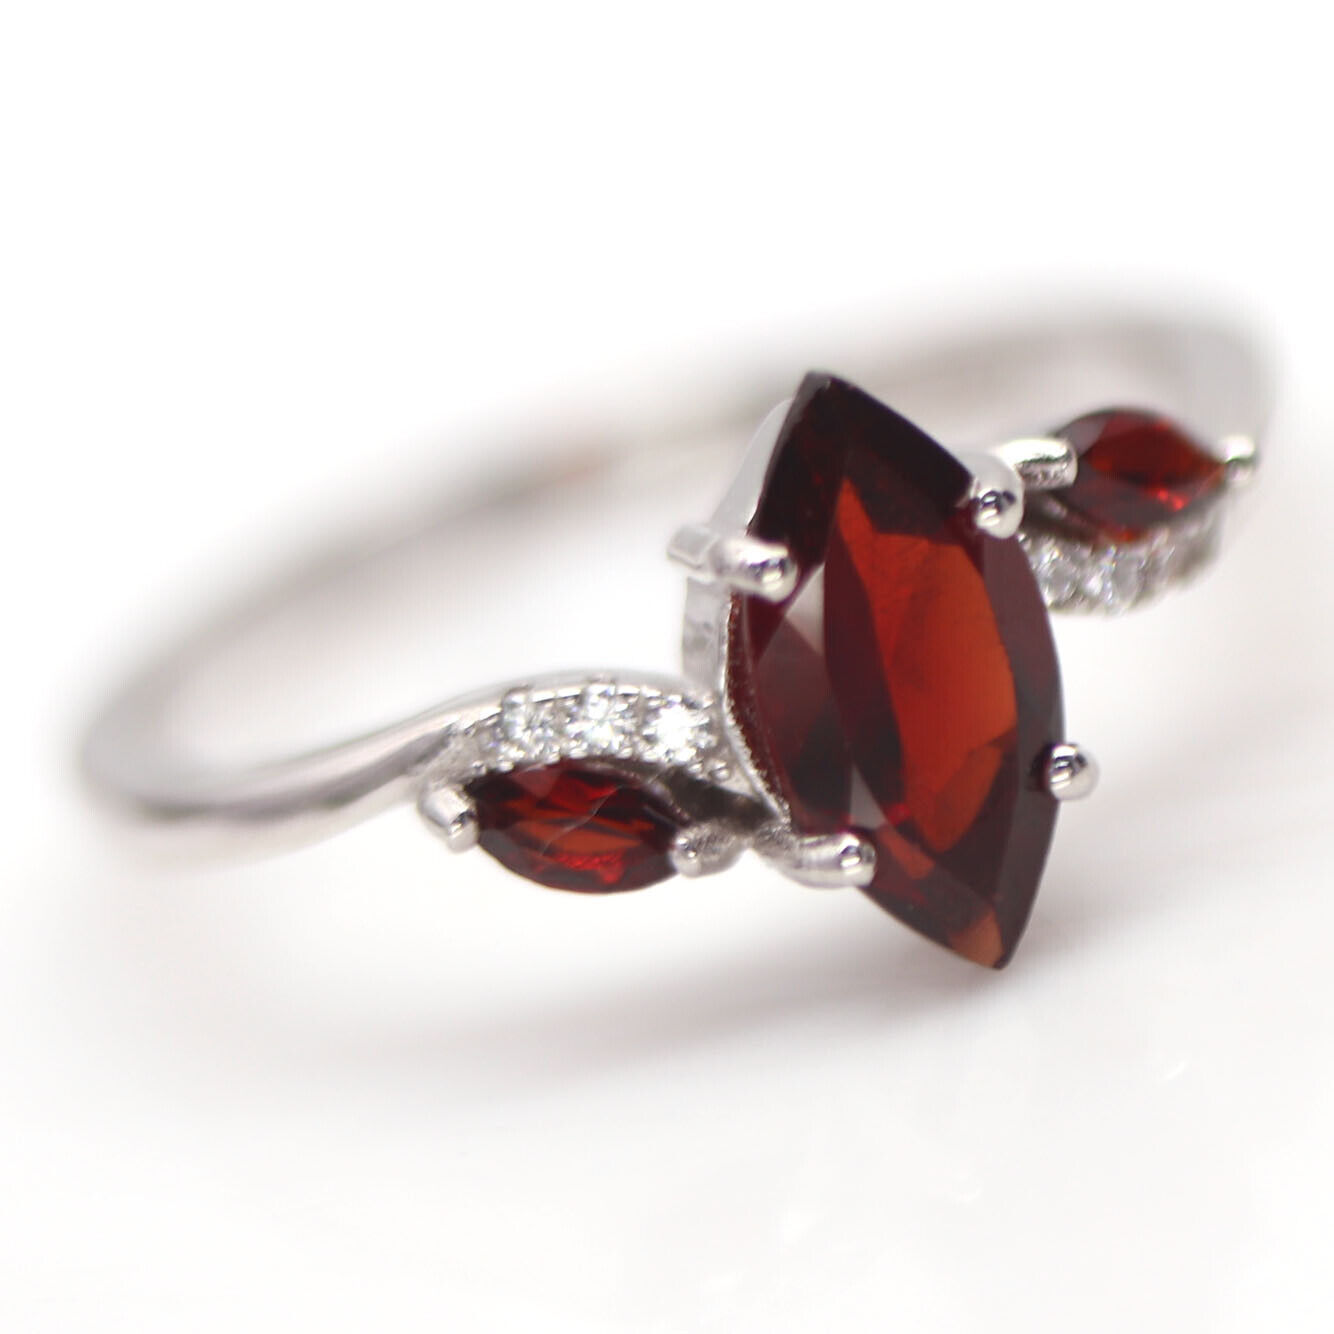 A 925 silver ring set with marquise cut garnet and white stones, (N.5). - Image 2 of 3